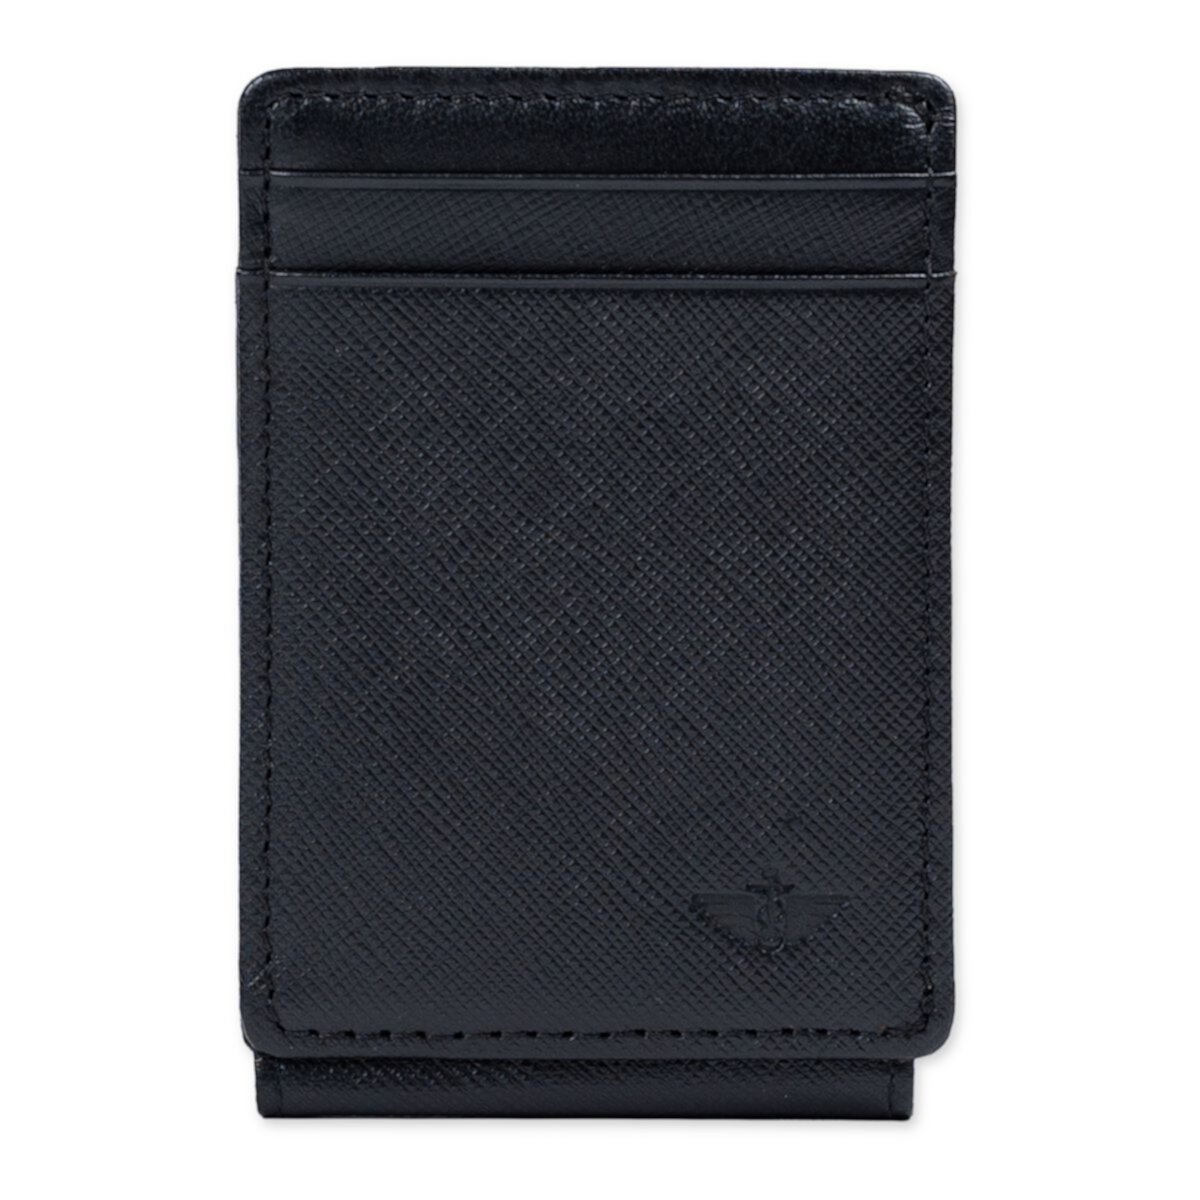 Men's Dockers RFID Saffiano Front Pocket Wallet with Magnetic Money Clip Dockers